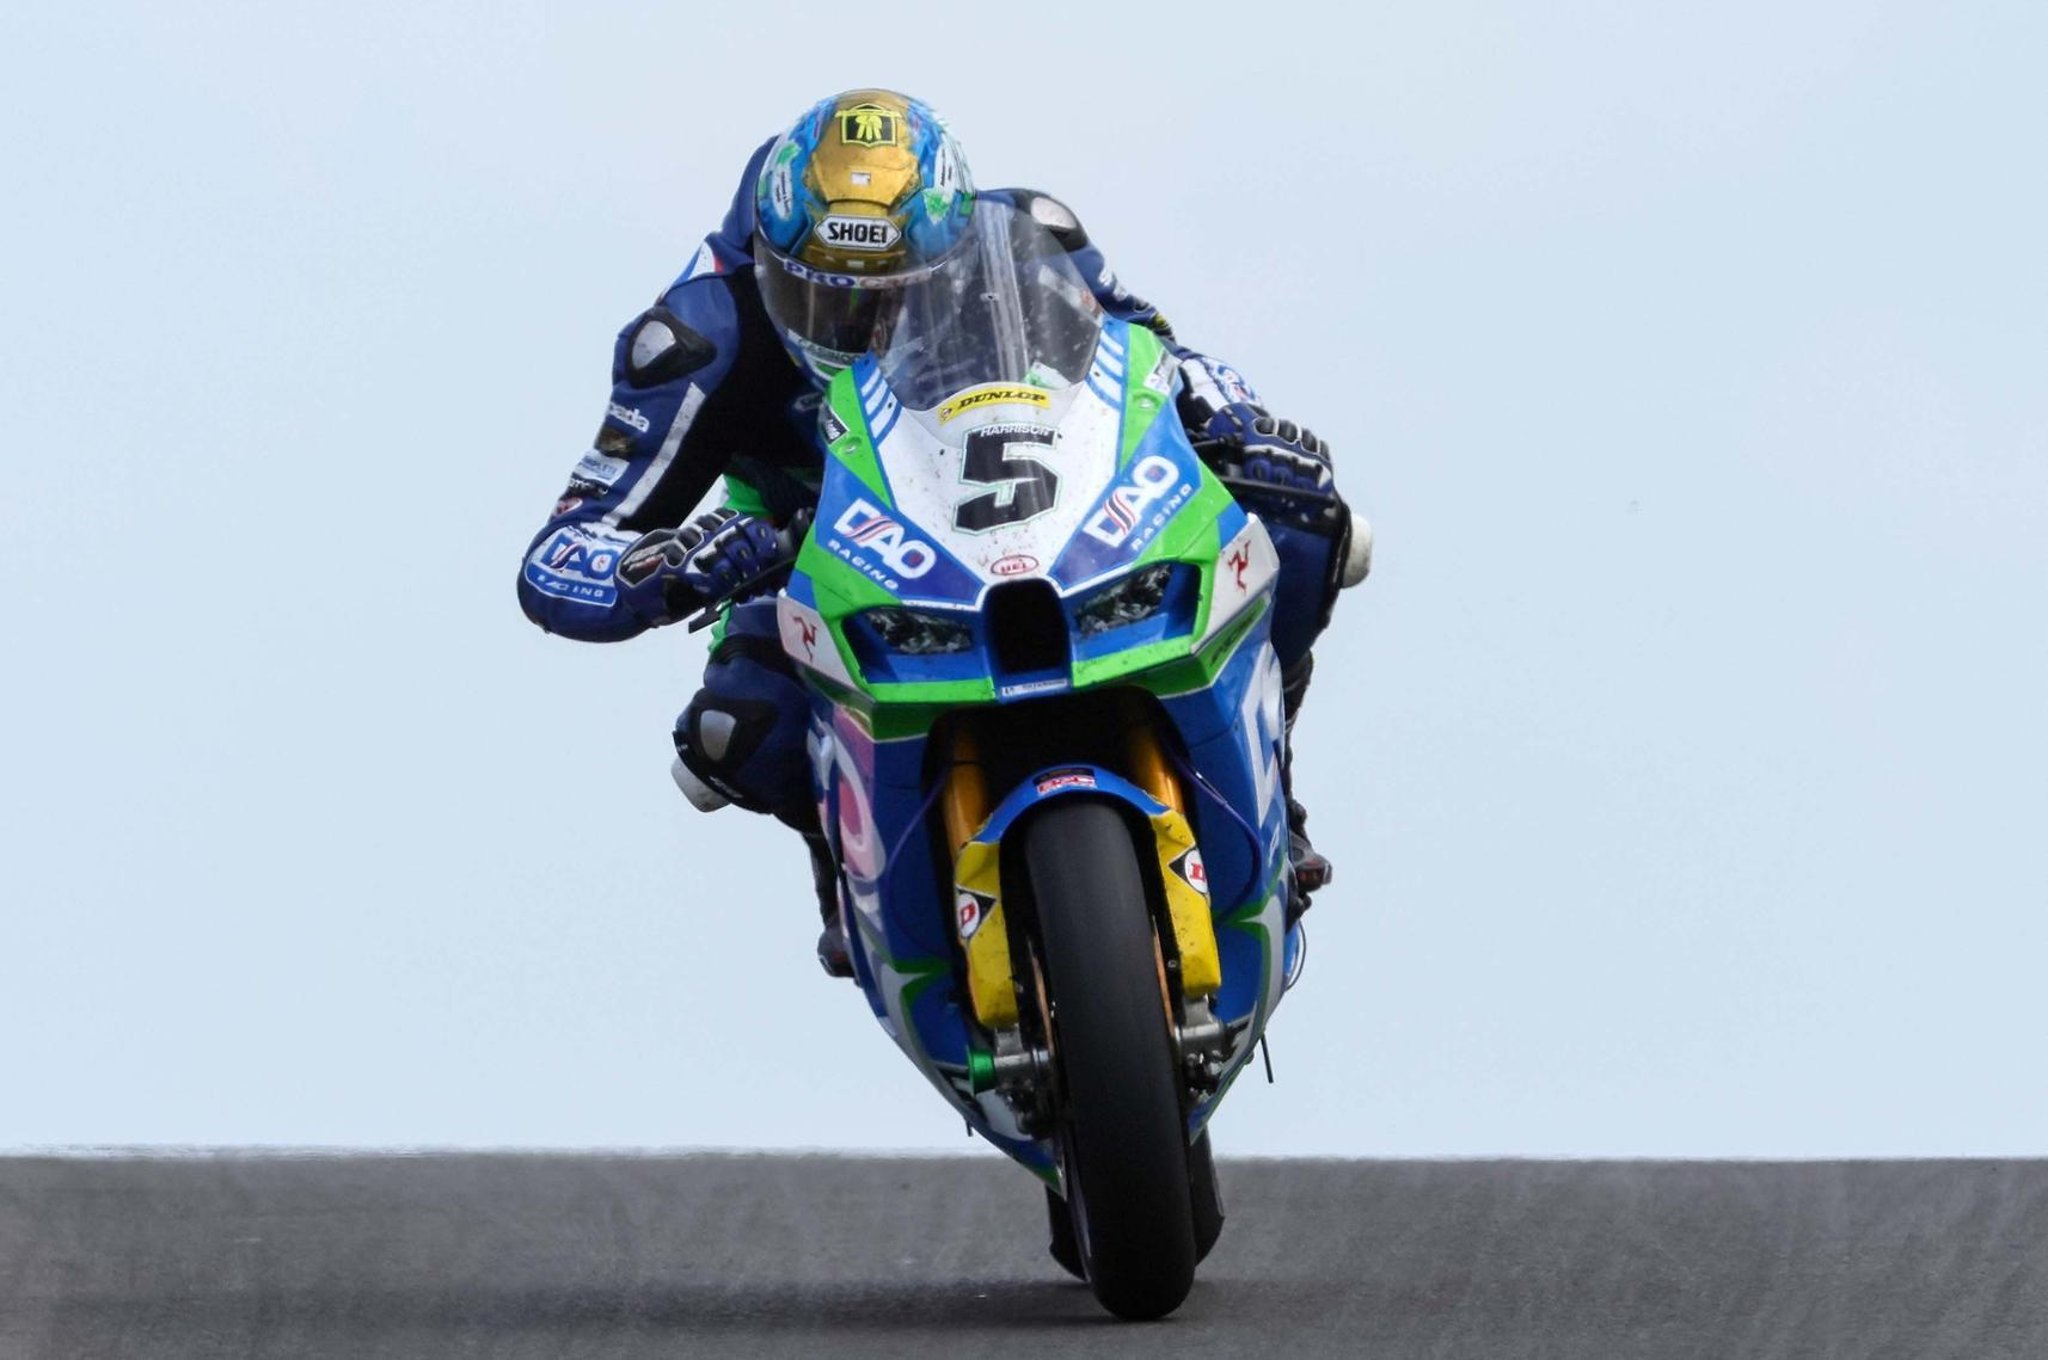 NW200: Top names forced out of feature Superbike race over safety issue with Dunlop tyres